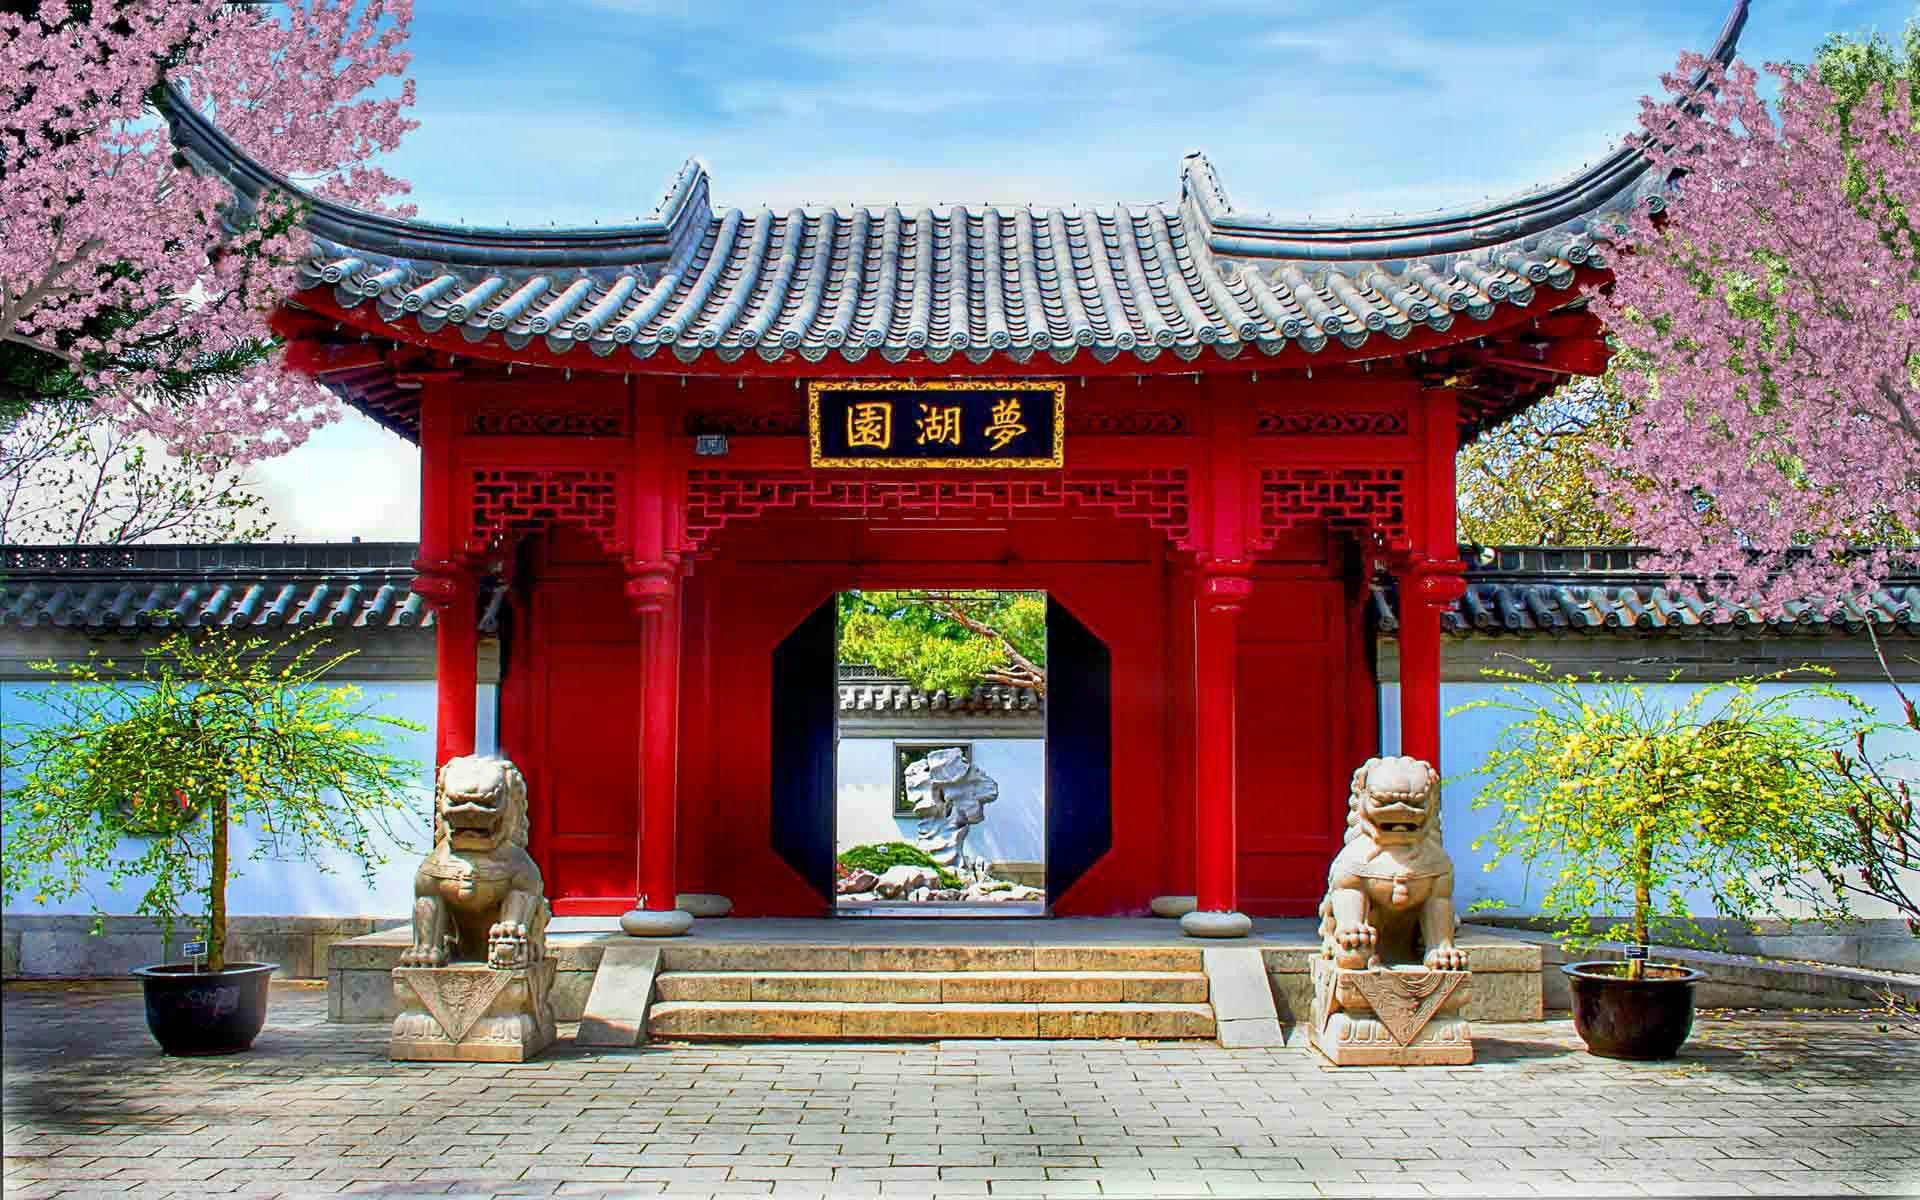 Temple Gate - Chinese Temple Wallpaper Hd - 1920x1200 Wallpaper 